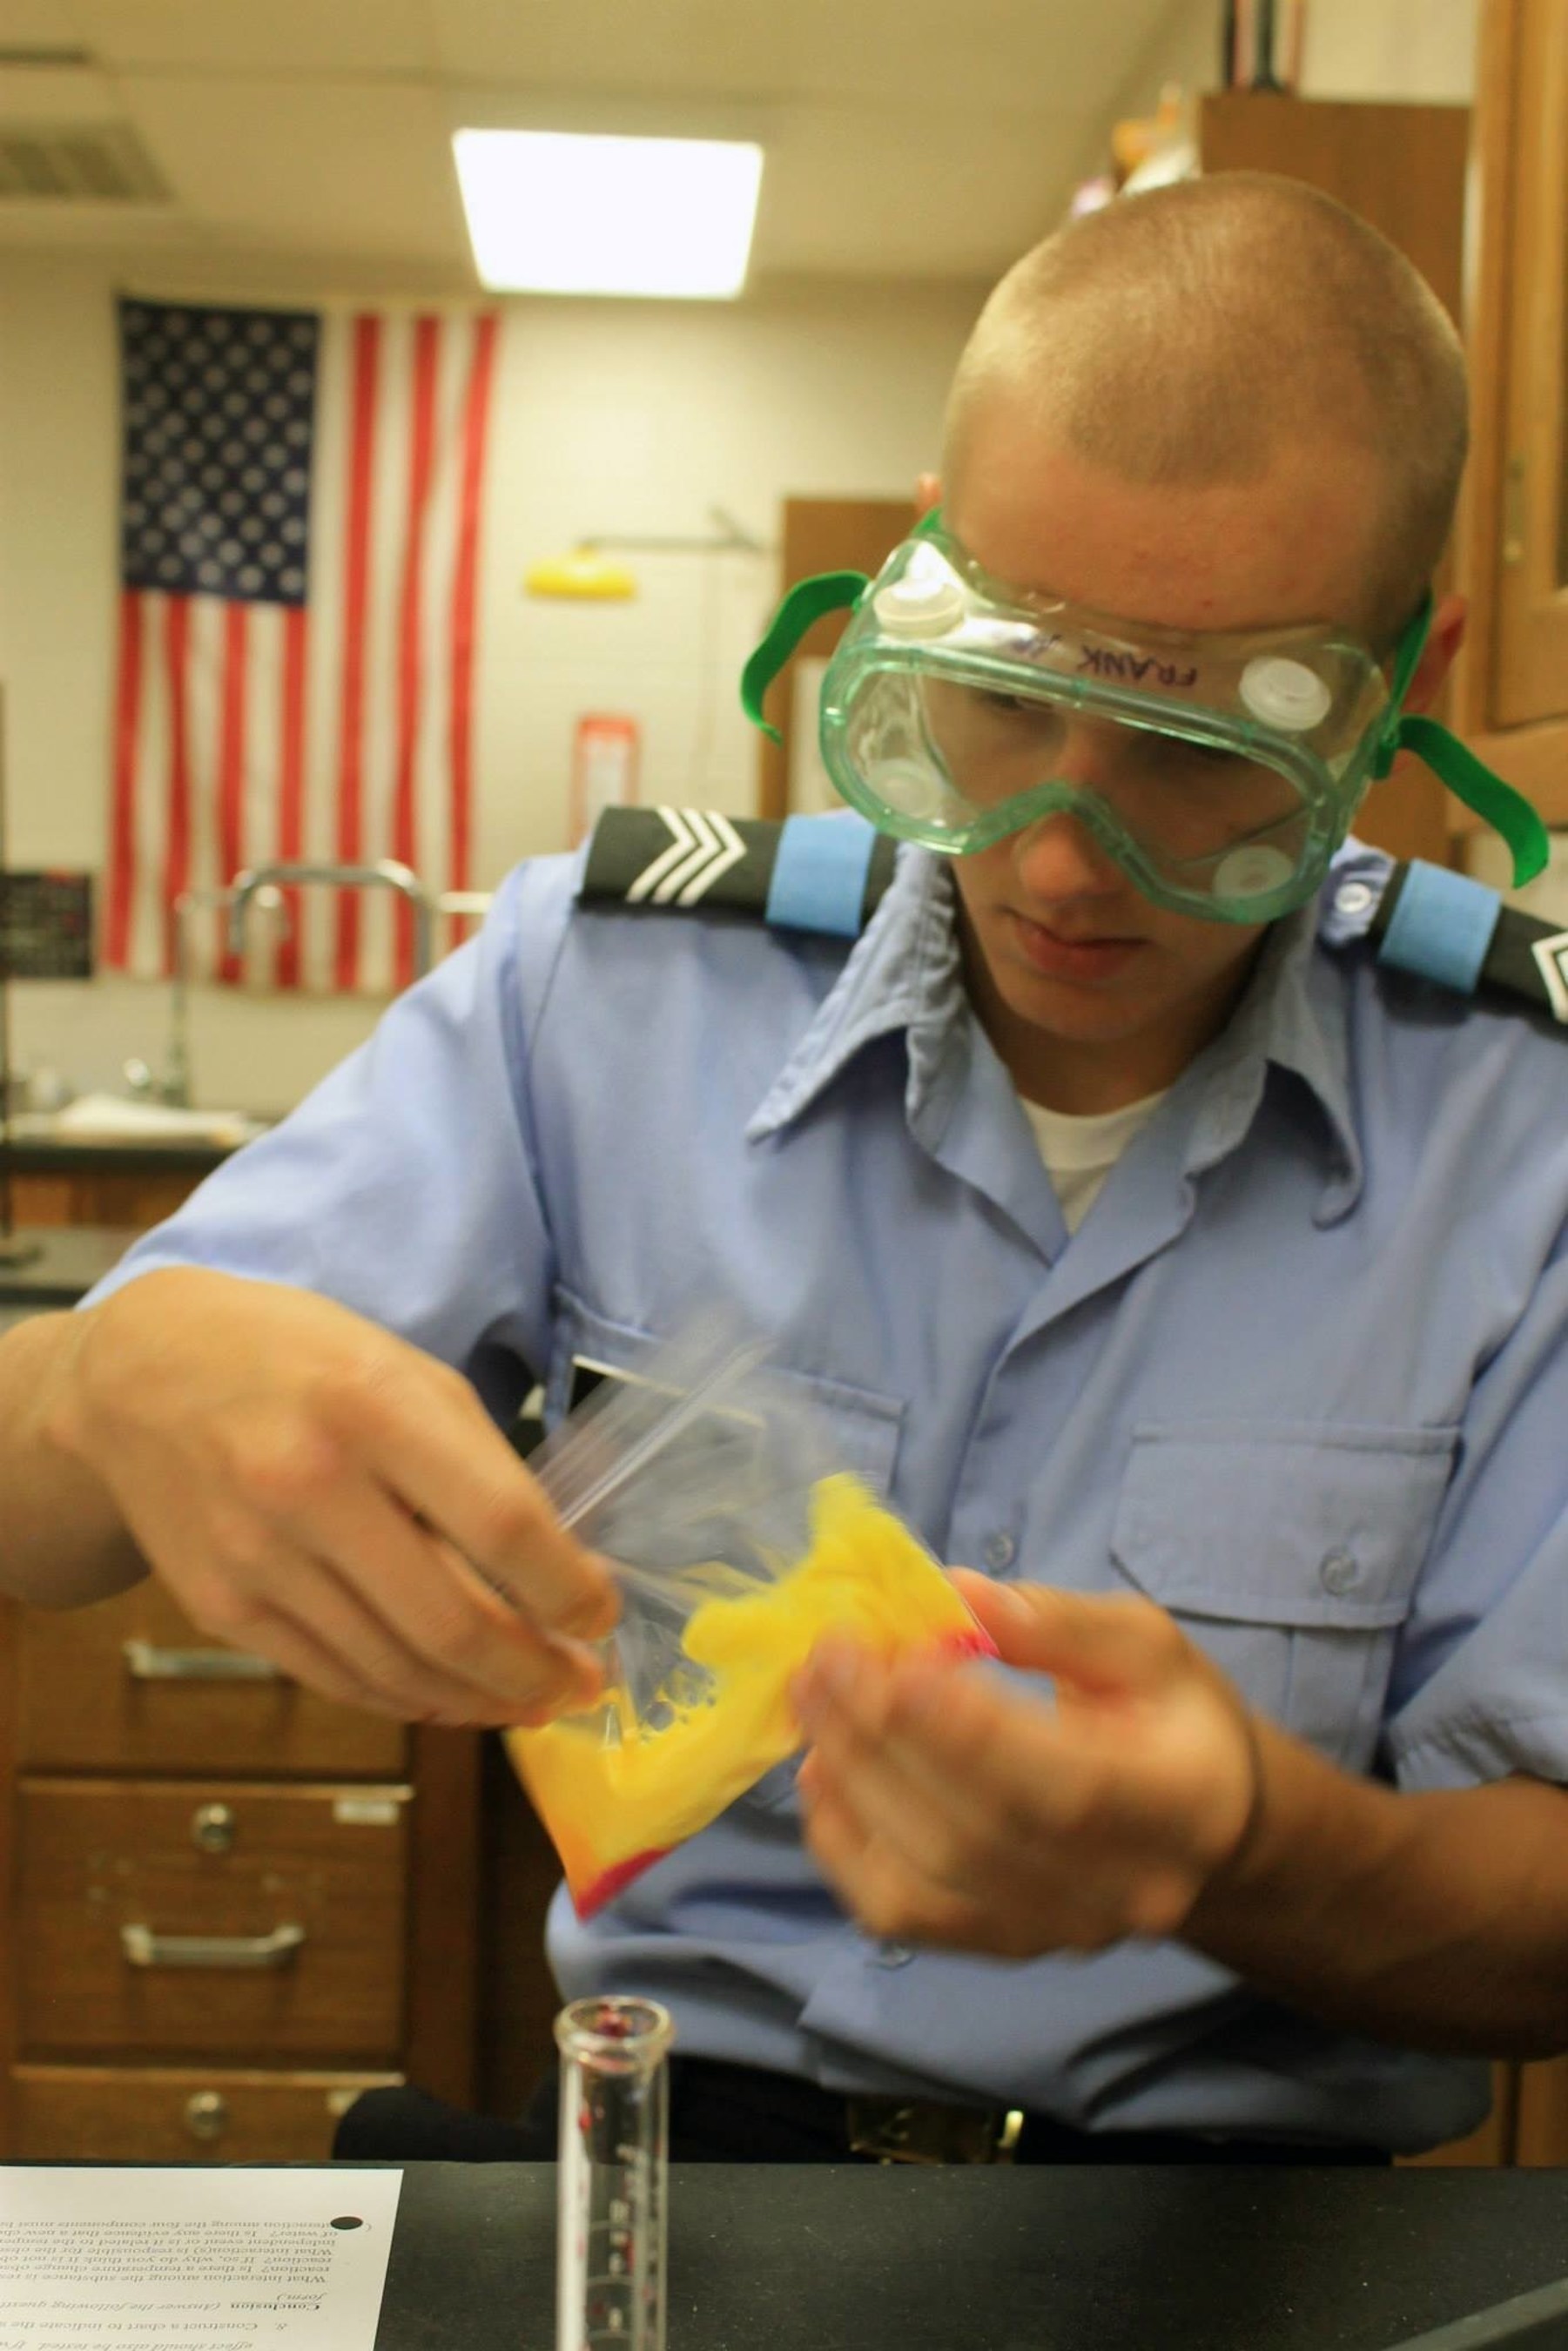 A St. John's Military School cadet engages in hands-on learning in Mrs. Pam Kraus' science class. "I do everything I can to make each lecture relatable," said Kraus. "If we're talking about molecules, I let the cadets build models using gumballs, marshmallows, and toothpicks. There is always a way to make a concept relevant, and it truly makes a difference in their comprehension."